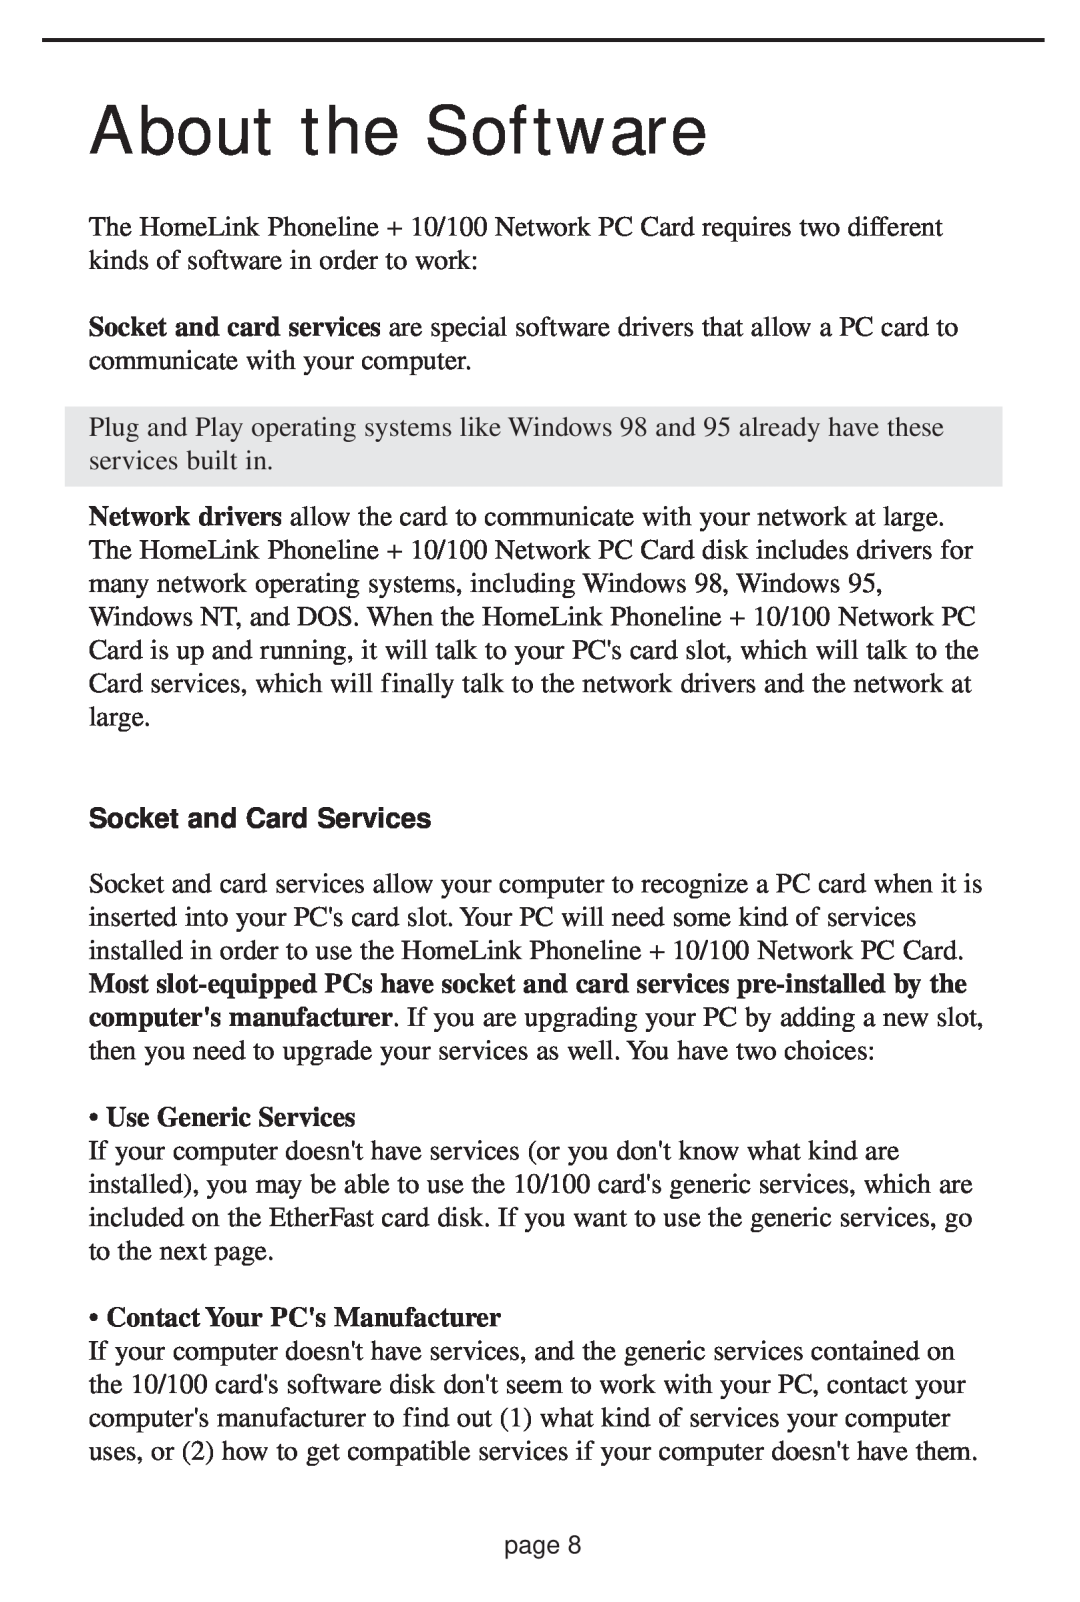 Linksys HPN100 manual About the Software, Use Generic Services, Contact Your PCs Manufacturer, Socket and Card Services 